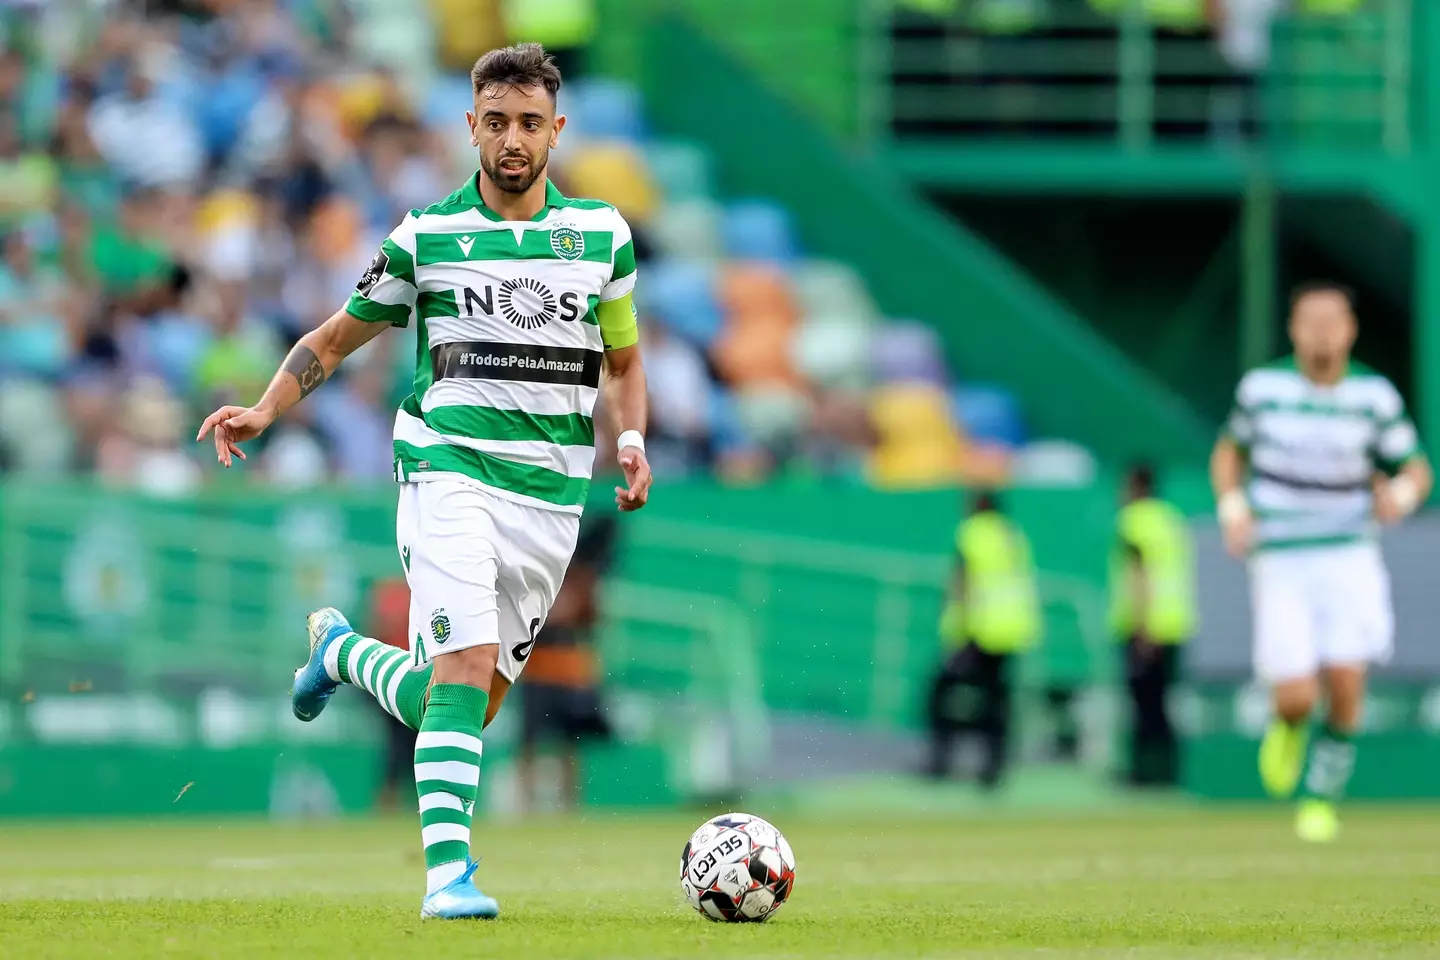 Bruno Fernandes joined Manchester United from Sporting CP in 2020 (Image: Alamy)